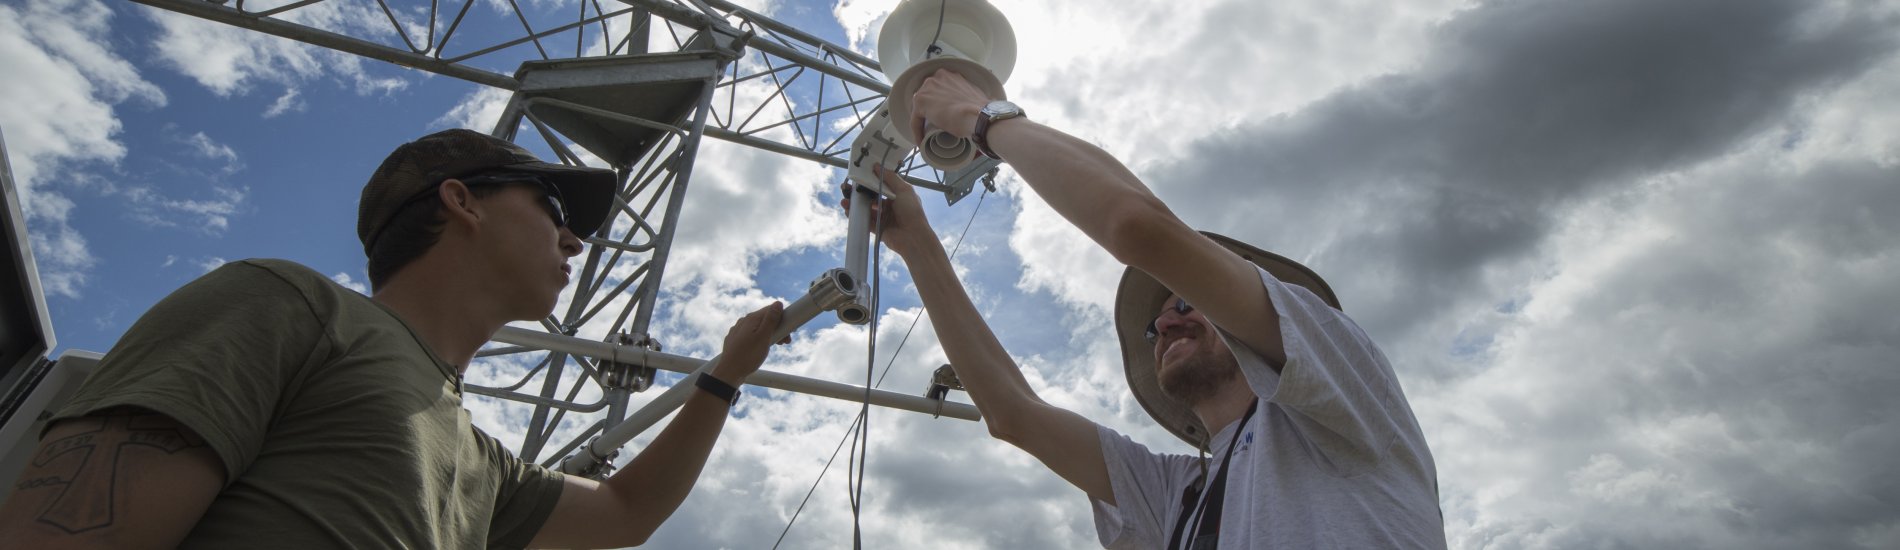 Researchers working on a Mesonet tower.